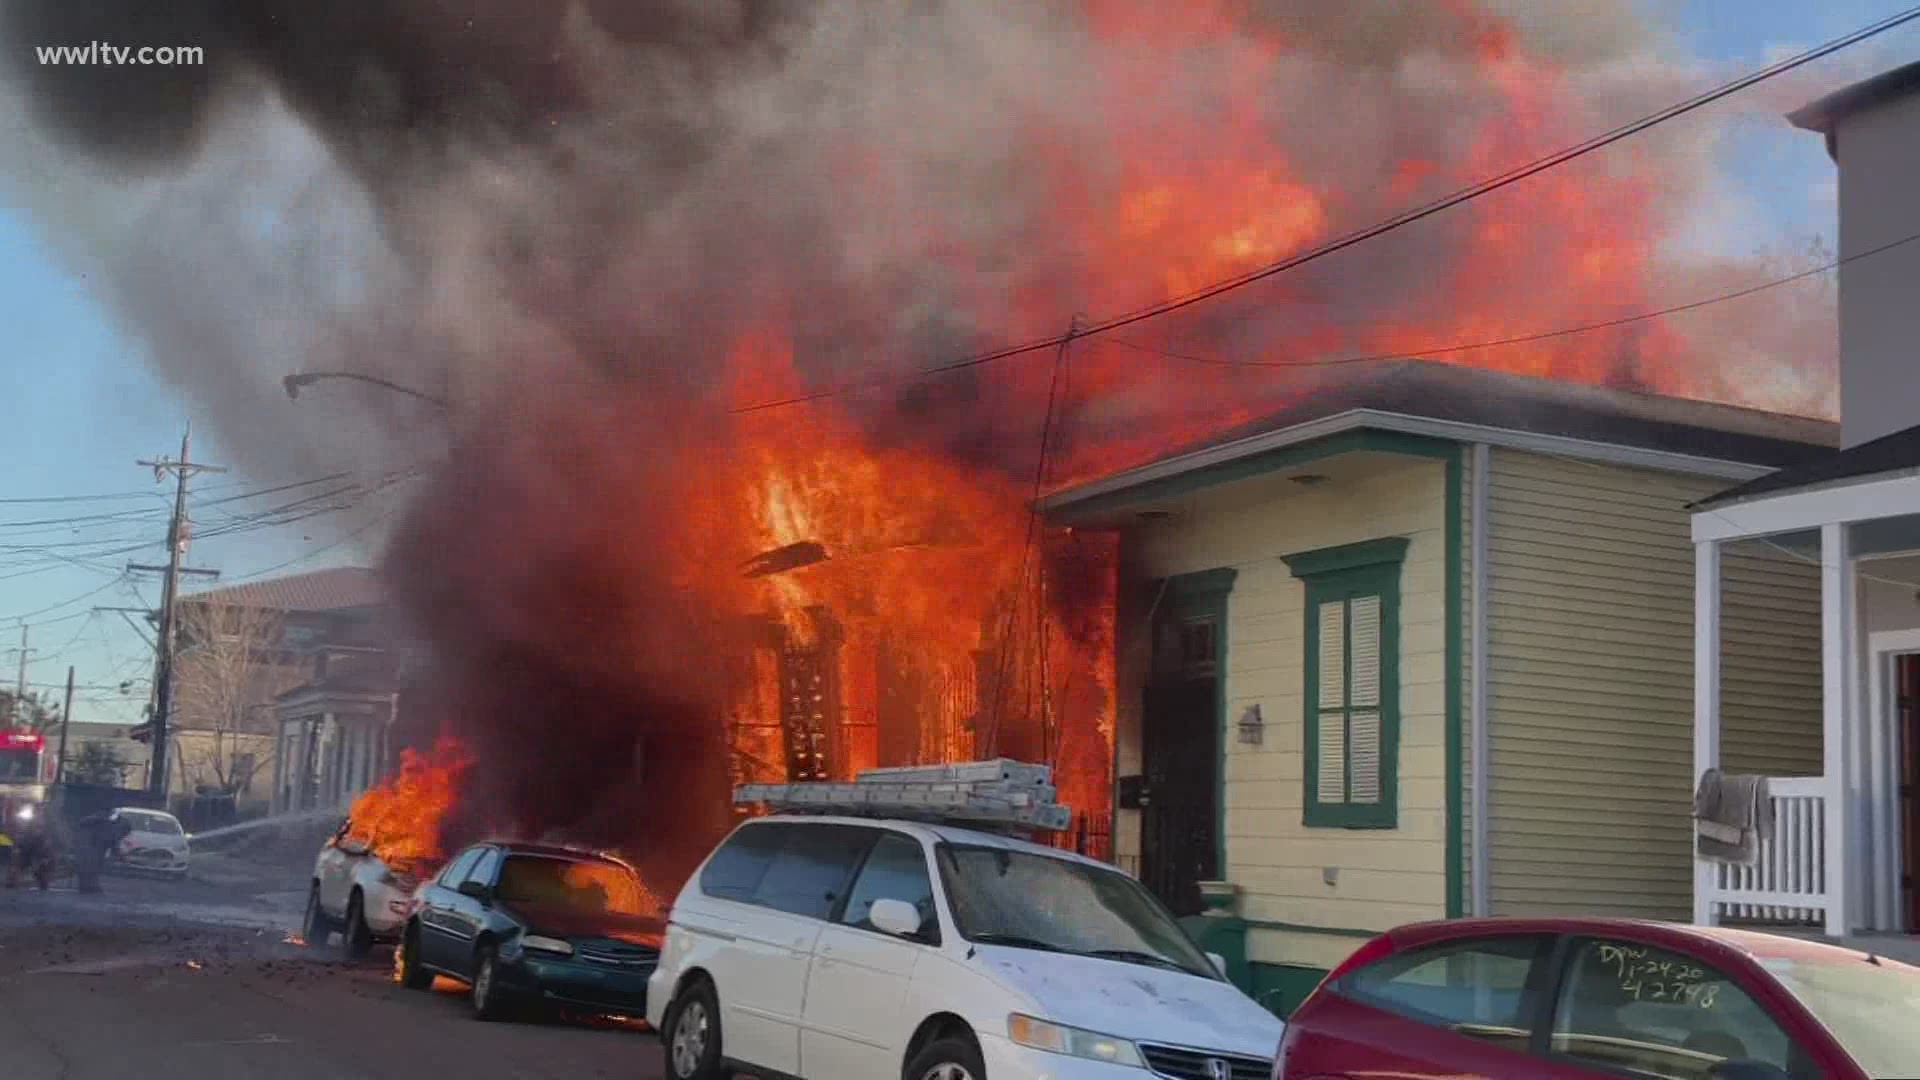 Two people were injured and three buildings were totally destroyed in a three-alarm fire in New Orleans Tuesday.